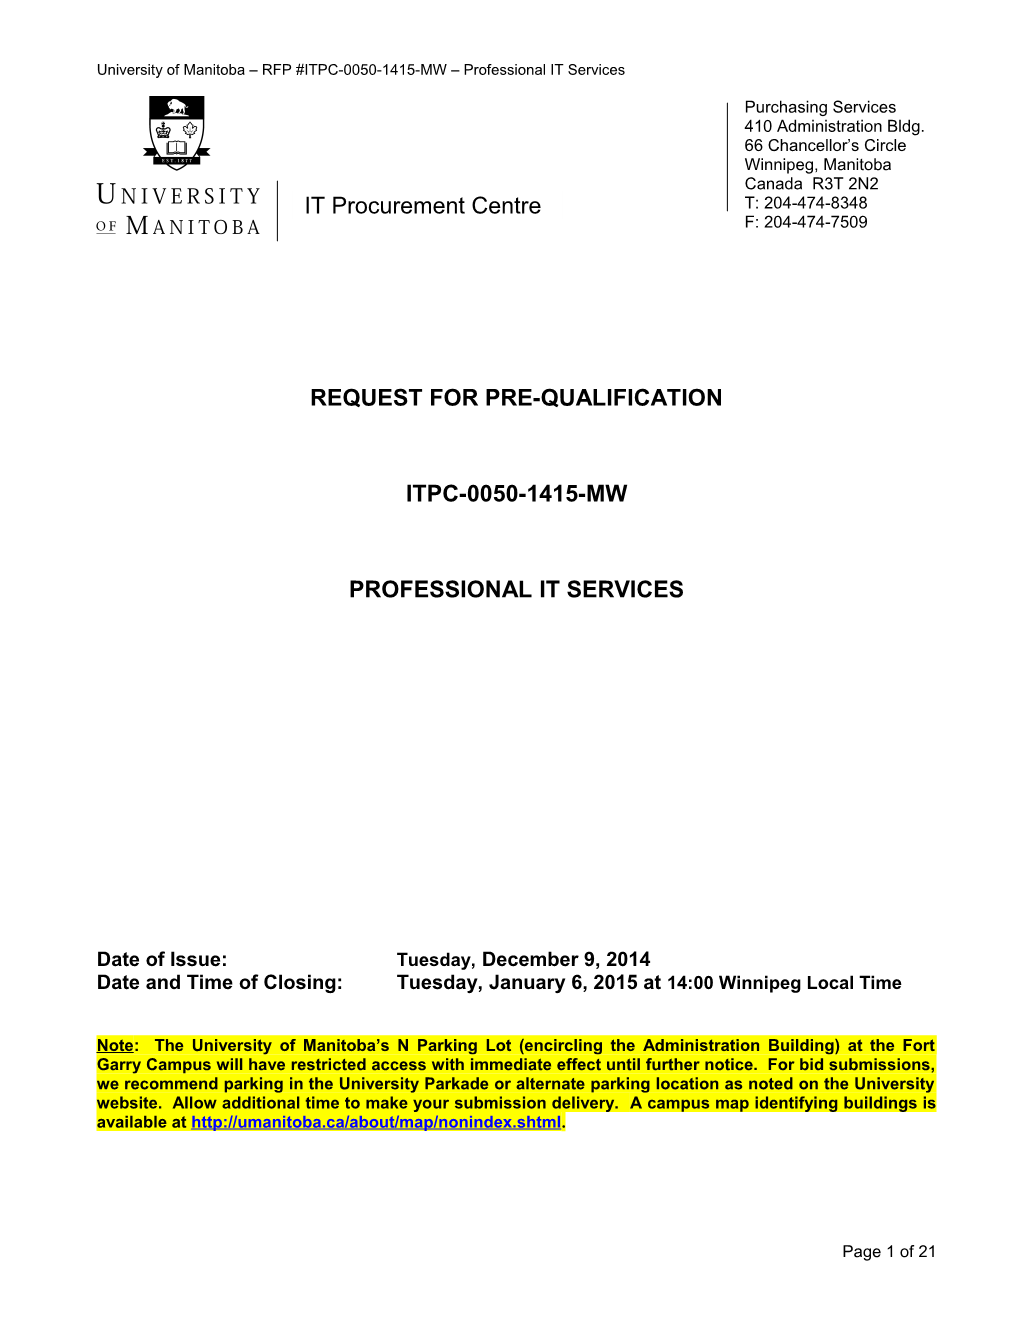 Financial and Purchasing Services Letterhead